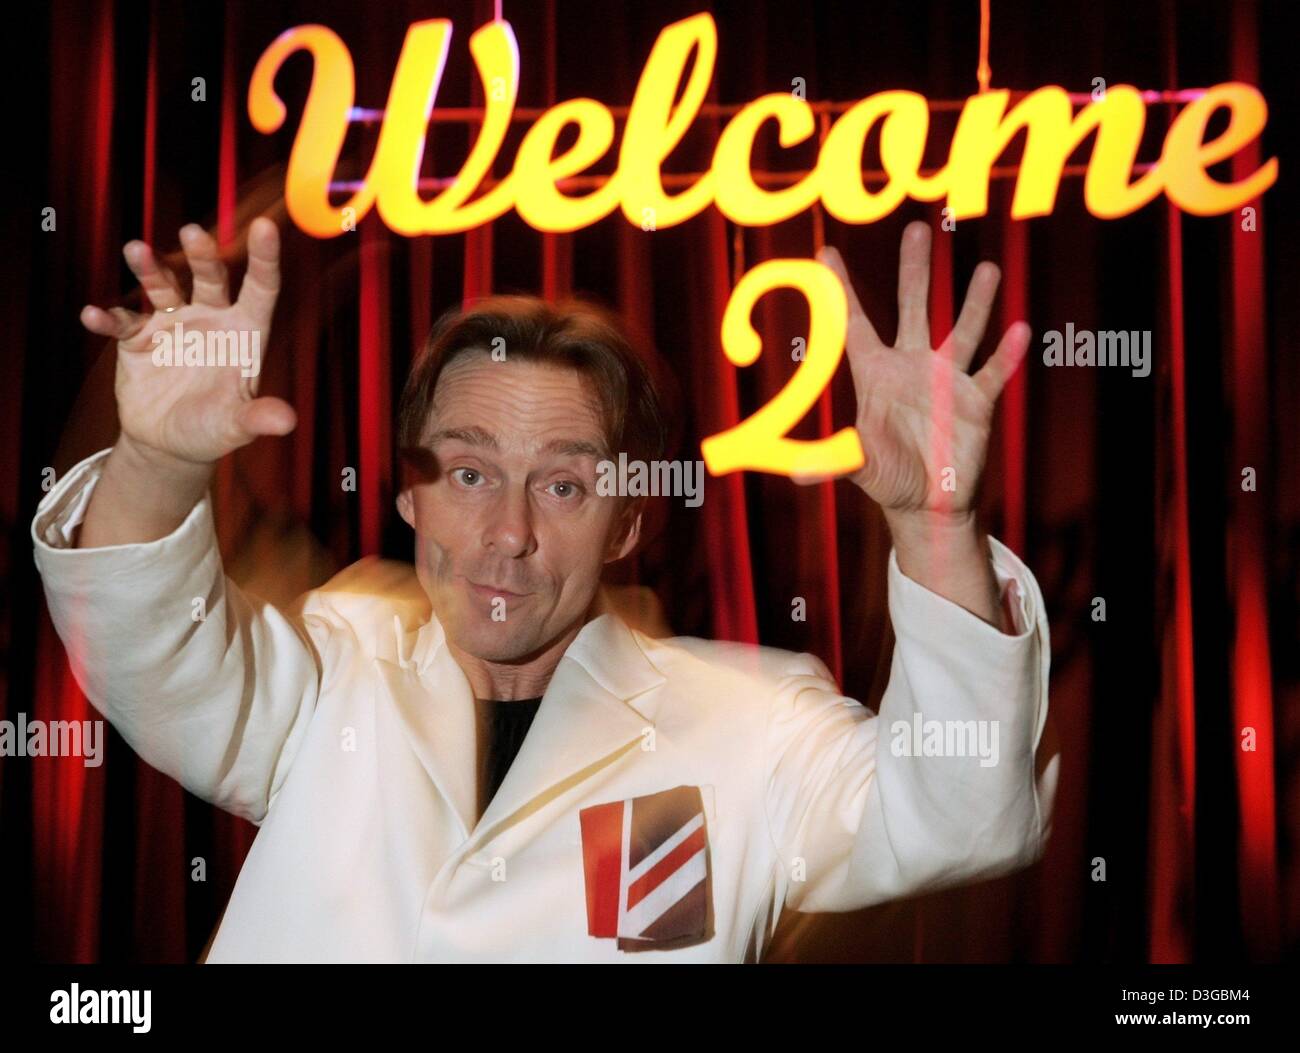 (dpa) - Comedian Mark Britton poses in front of the slogan 'Welcome 2' prior to his appearance in a TV show in Berlin, Germany, 27 October 2004. The son of an English psychologist and an American actress has been touring all over the world. Currently he lives in Cologne, Germany. Stock Photo